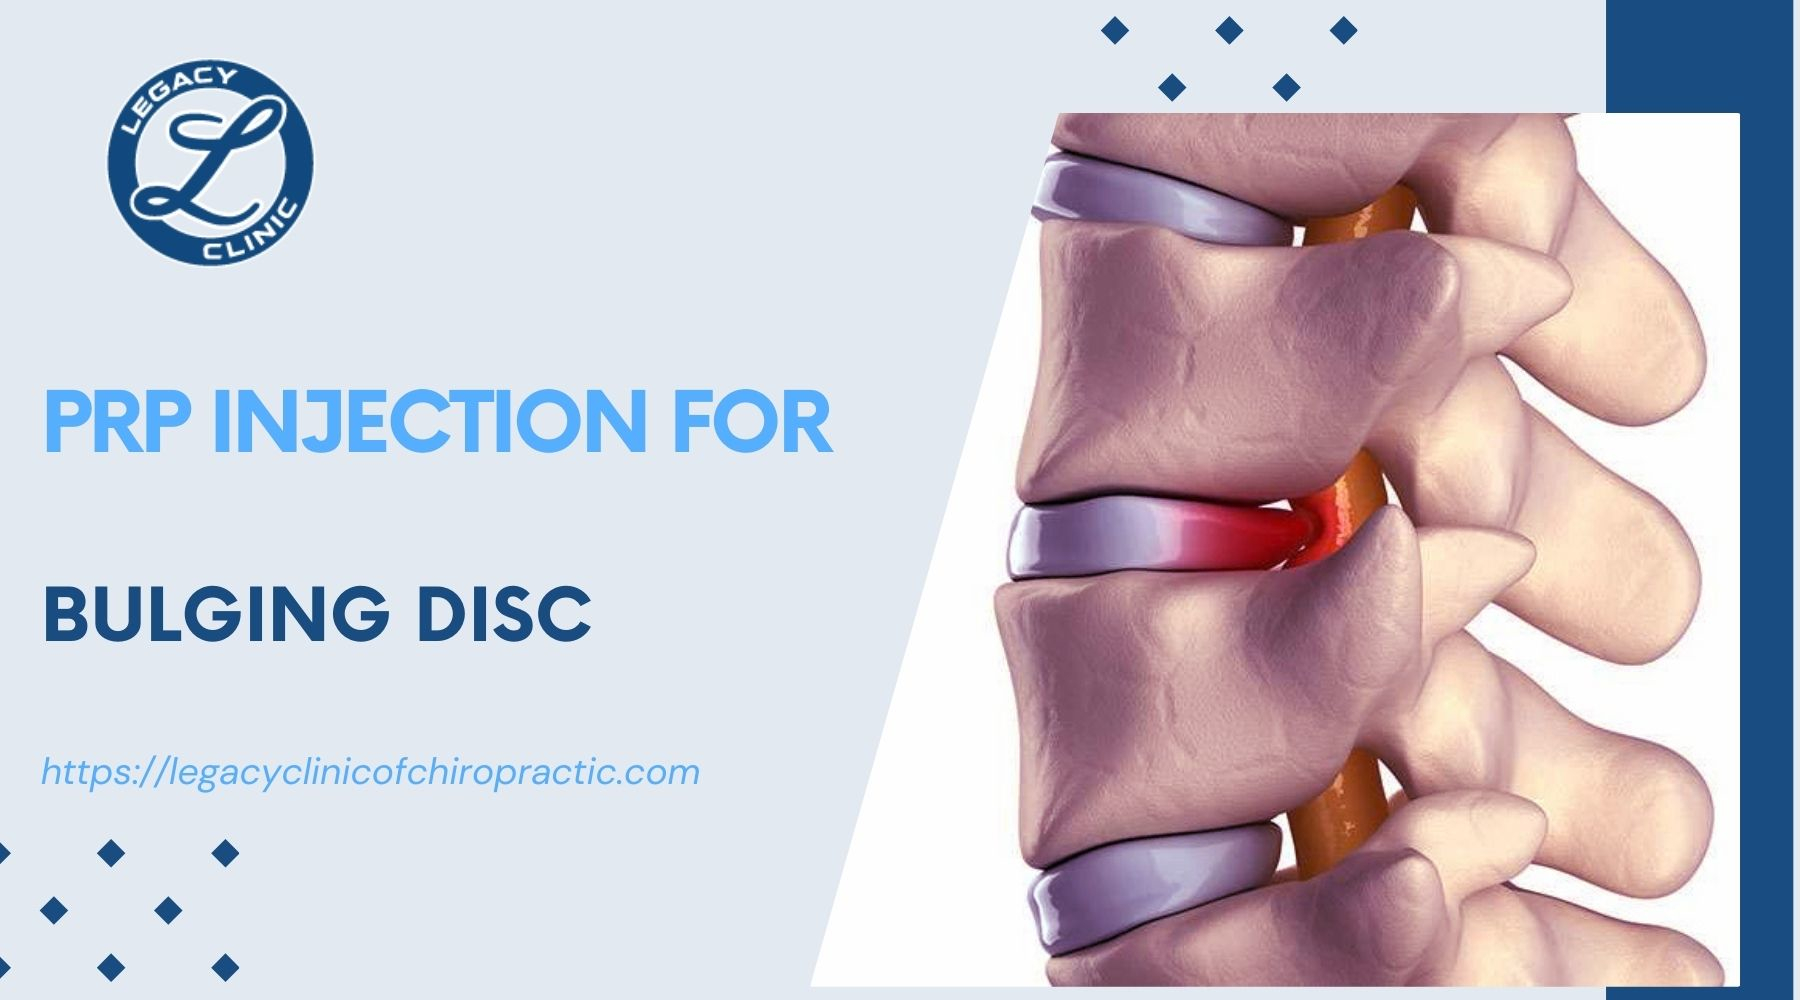 prp injection for bulging disc